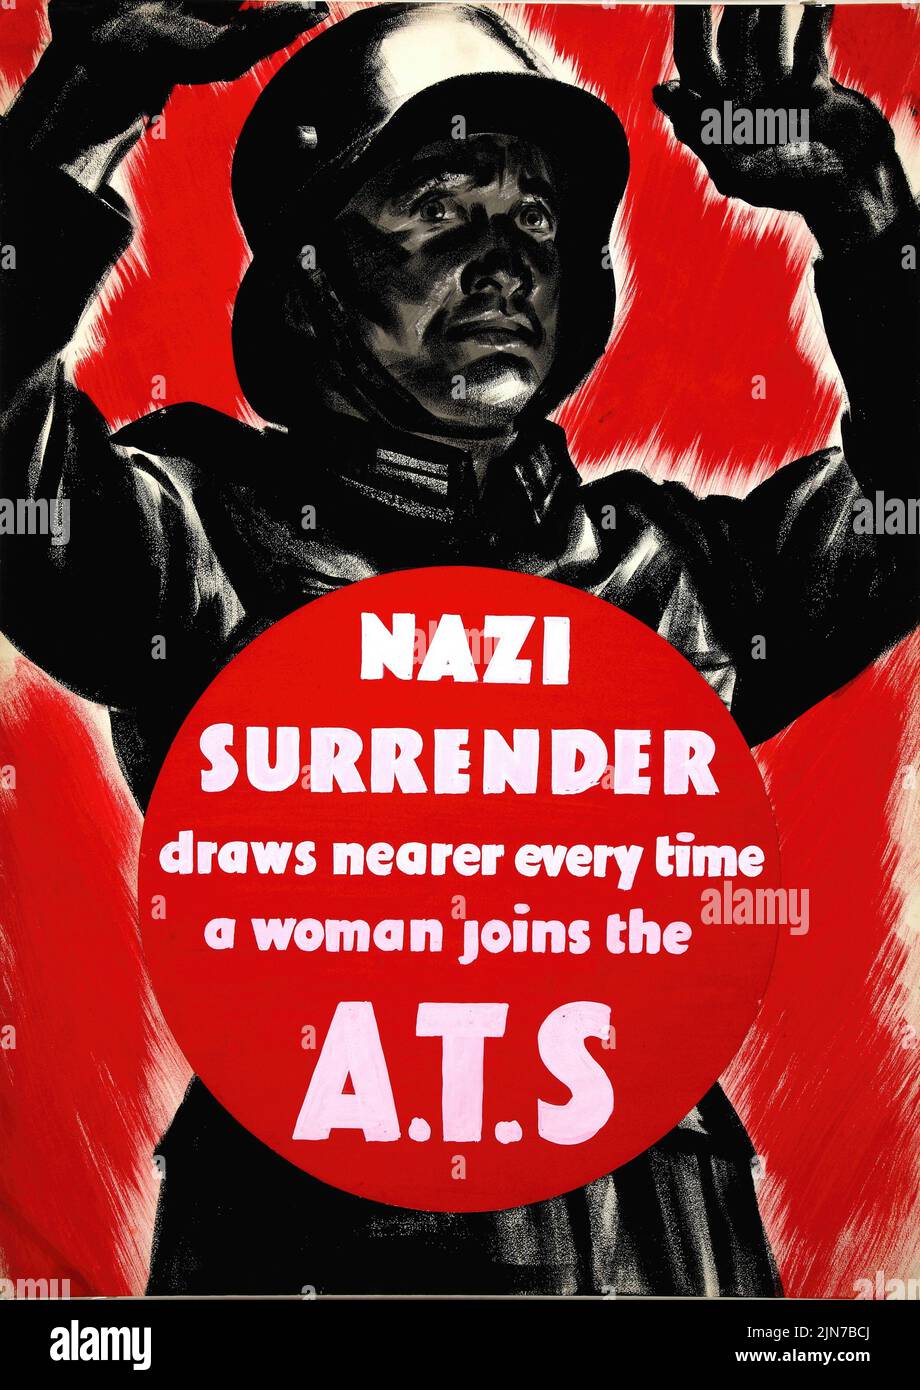 Nazi surrender draws nearer every time a woman joins the A. T. S. (1939 - 1946) British World War II era poster Stock Photo